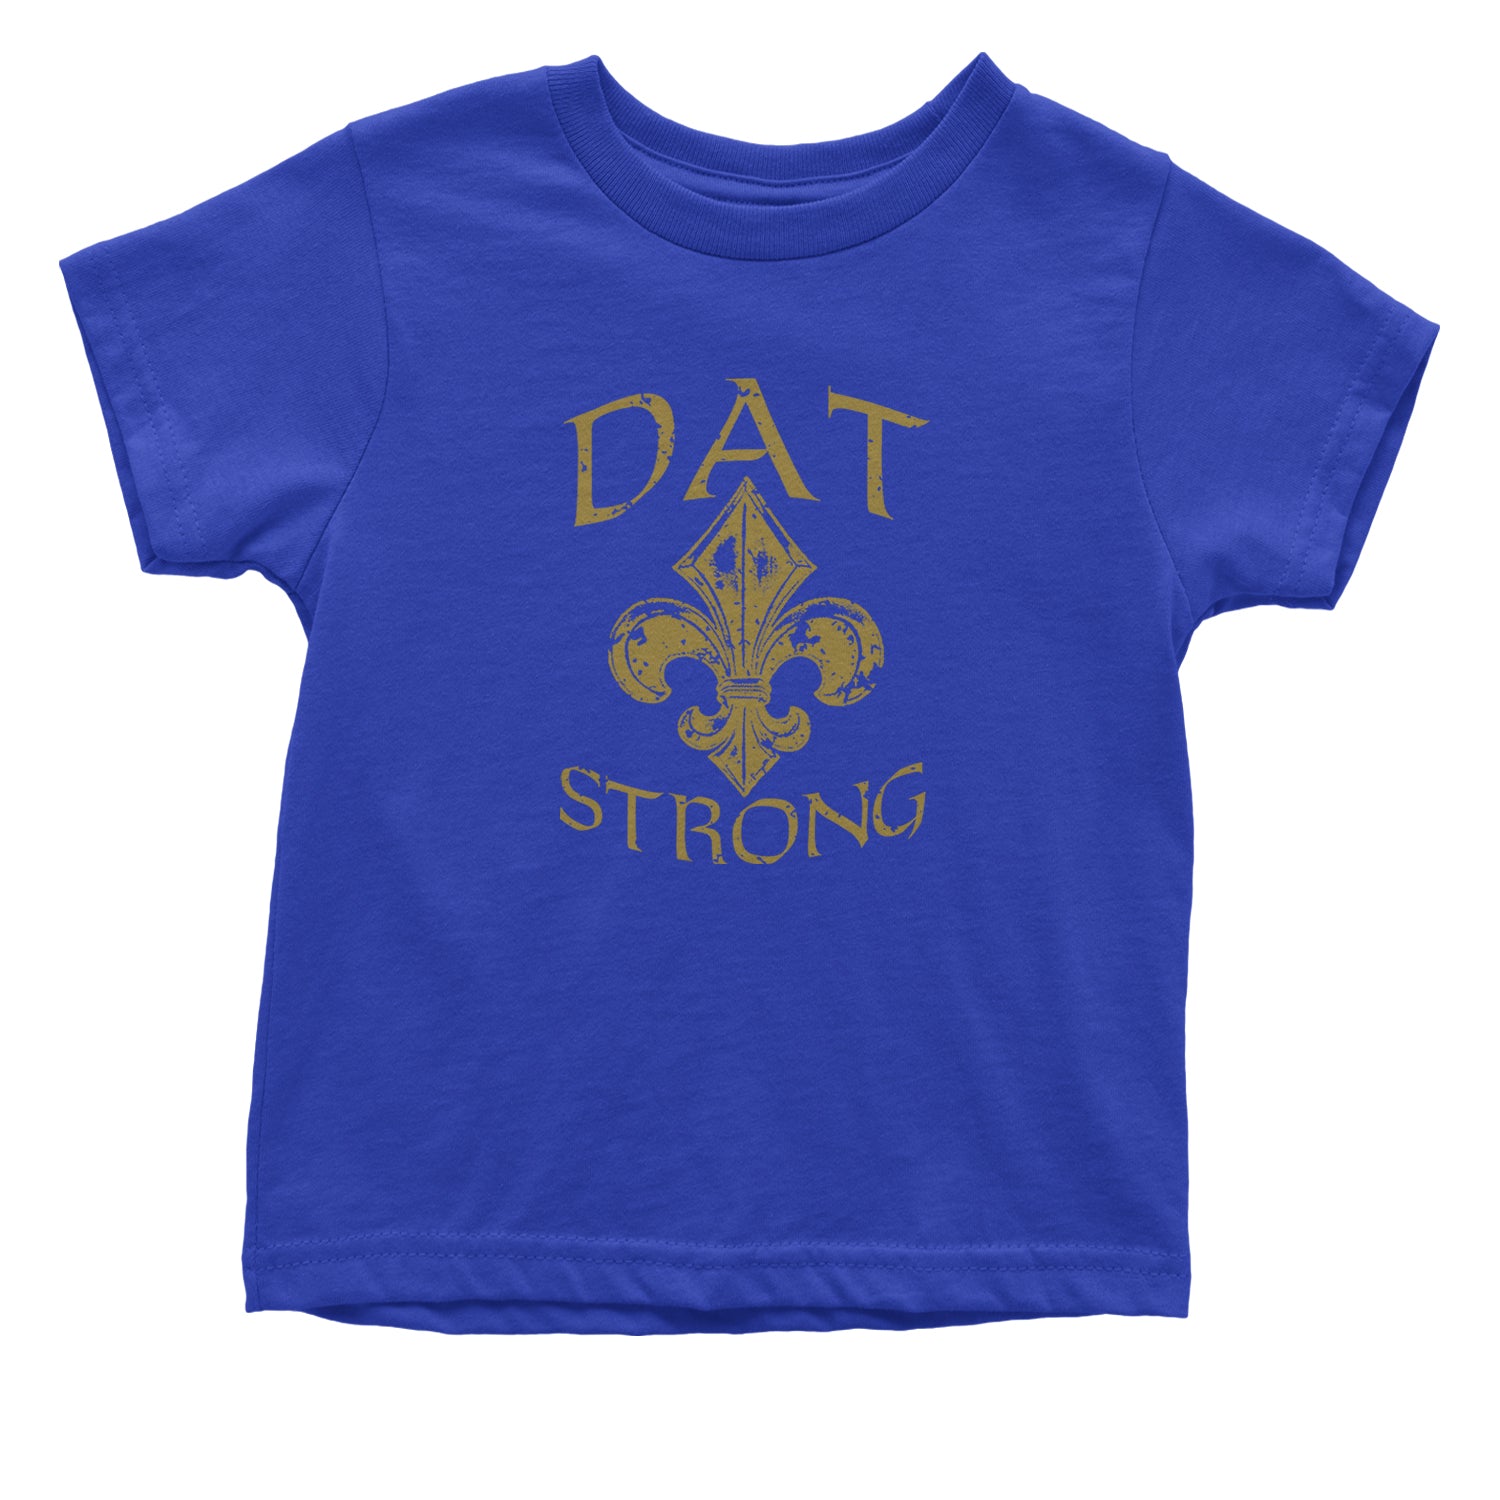 Dat Strong New Orleans Infant One-Piece Romper Bodysuit and Toddler T-shirt dat, de, fan, fleur, jersey, lis, new, orleans, sports, strong, who by Expression Tees